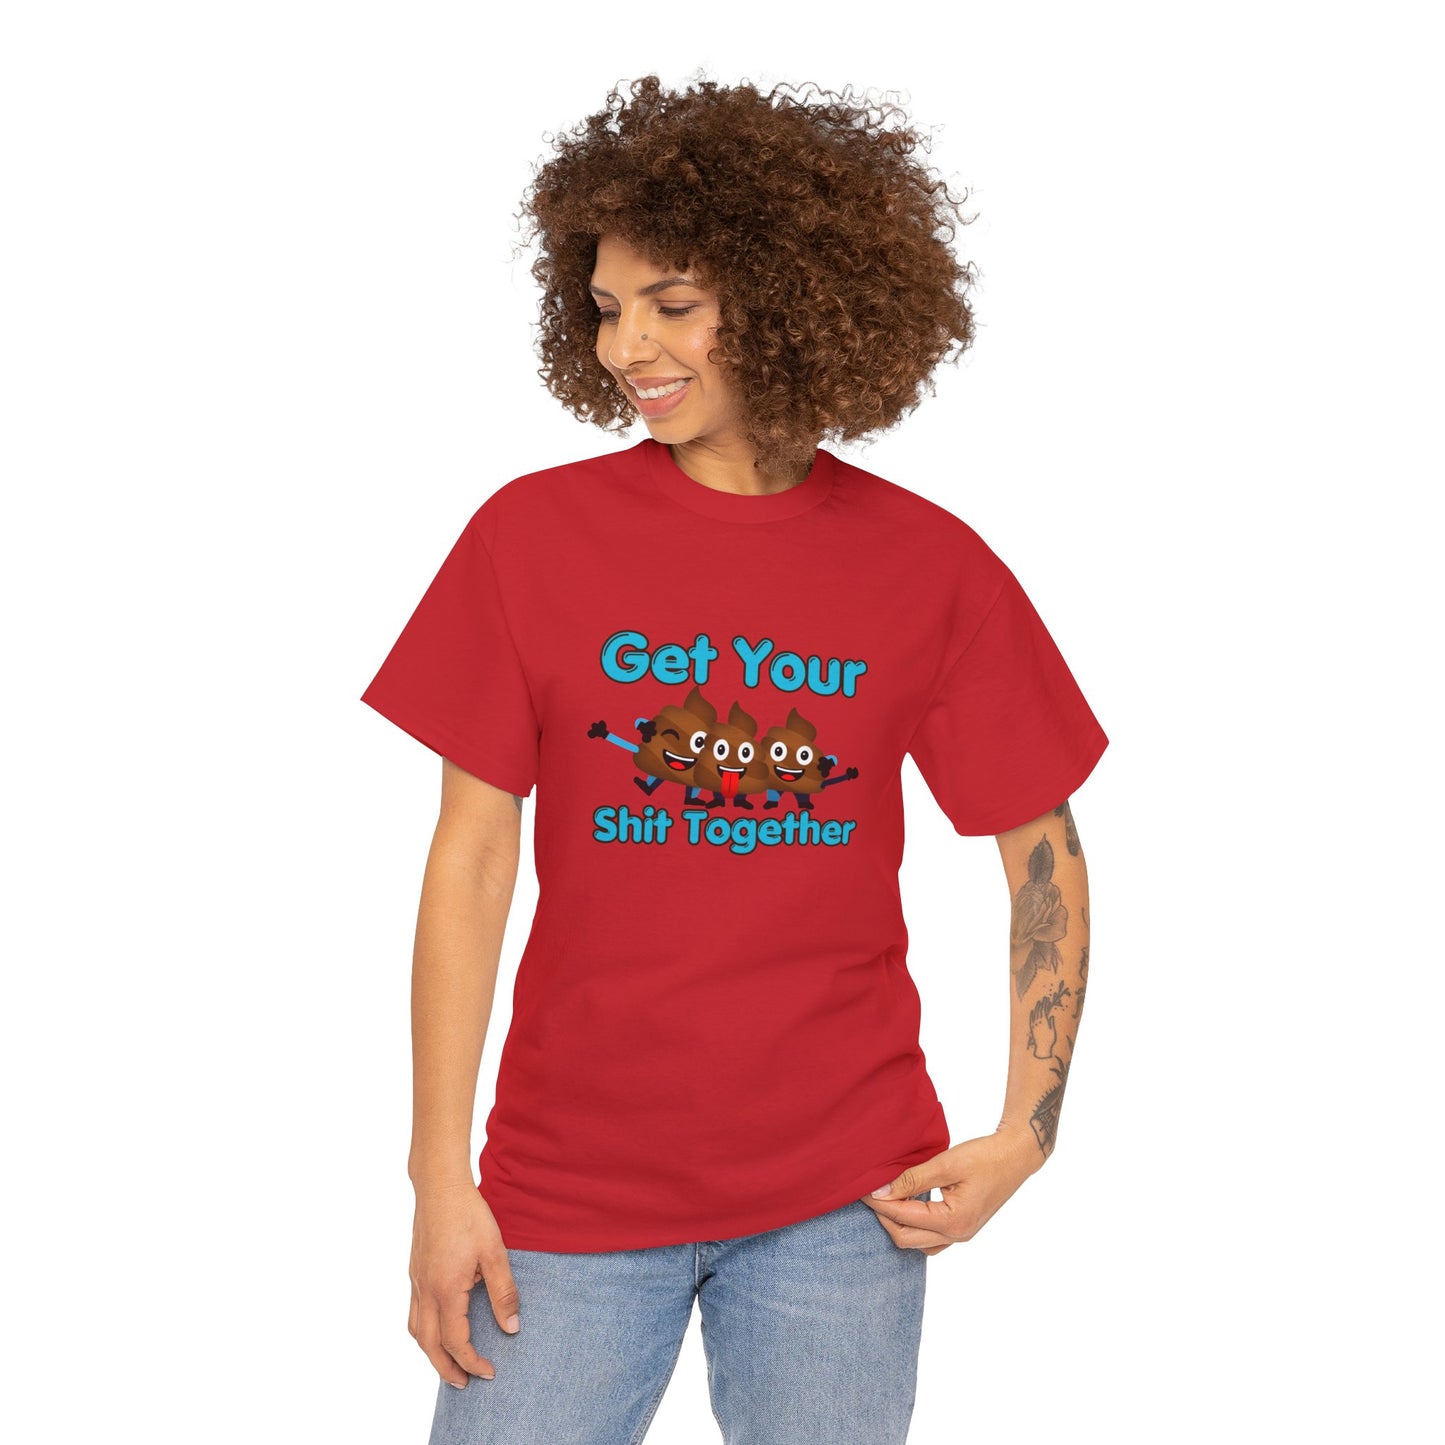 Get Your Shit Together, Funny Poop Emojis, Dad Shirt, Pun t-shirt, Potty Humor, Hilarious Dad Gift, Funny Father's day Gift, edgy, Fun shirt